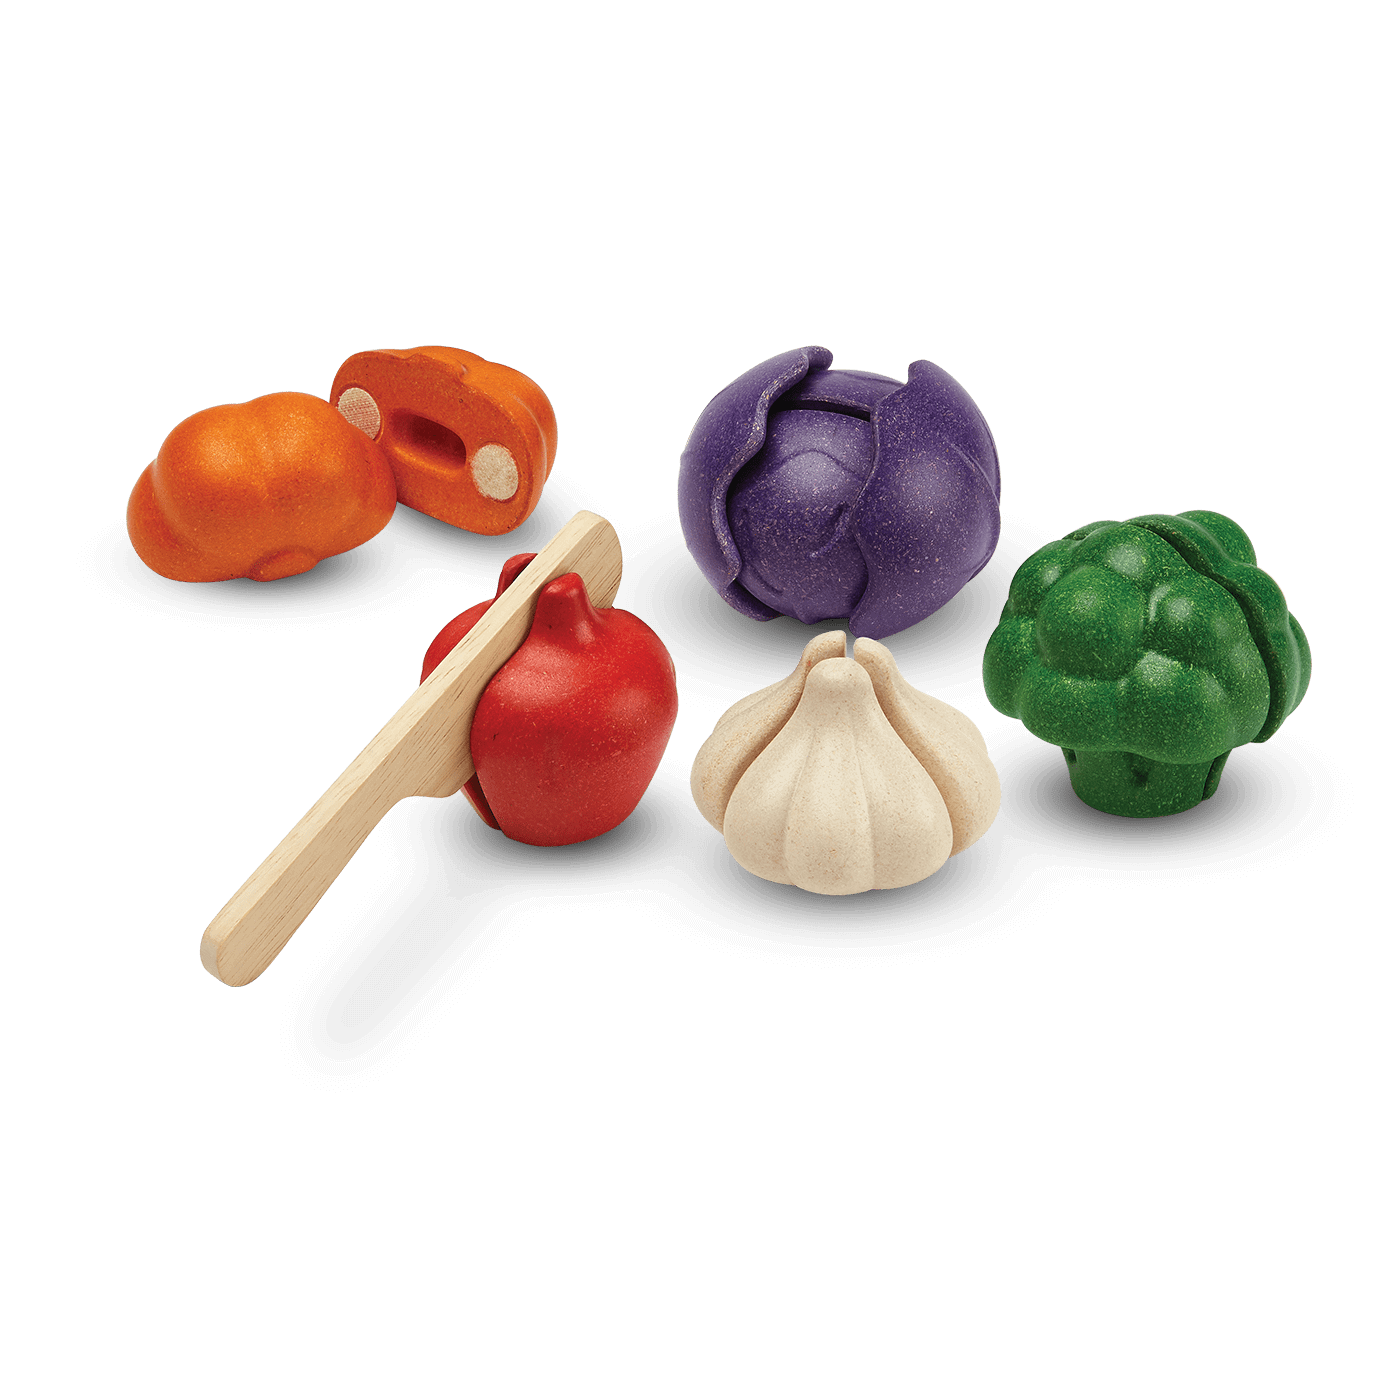 A wooden vegetable set, including garlic, broccoli, onion, pumpkin, and tomato. The tomato is being cut